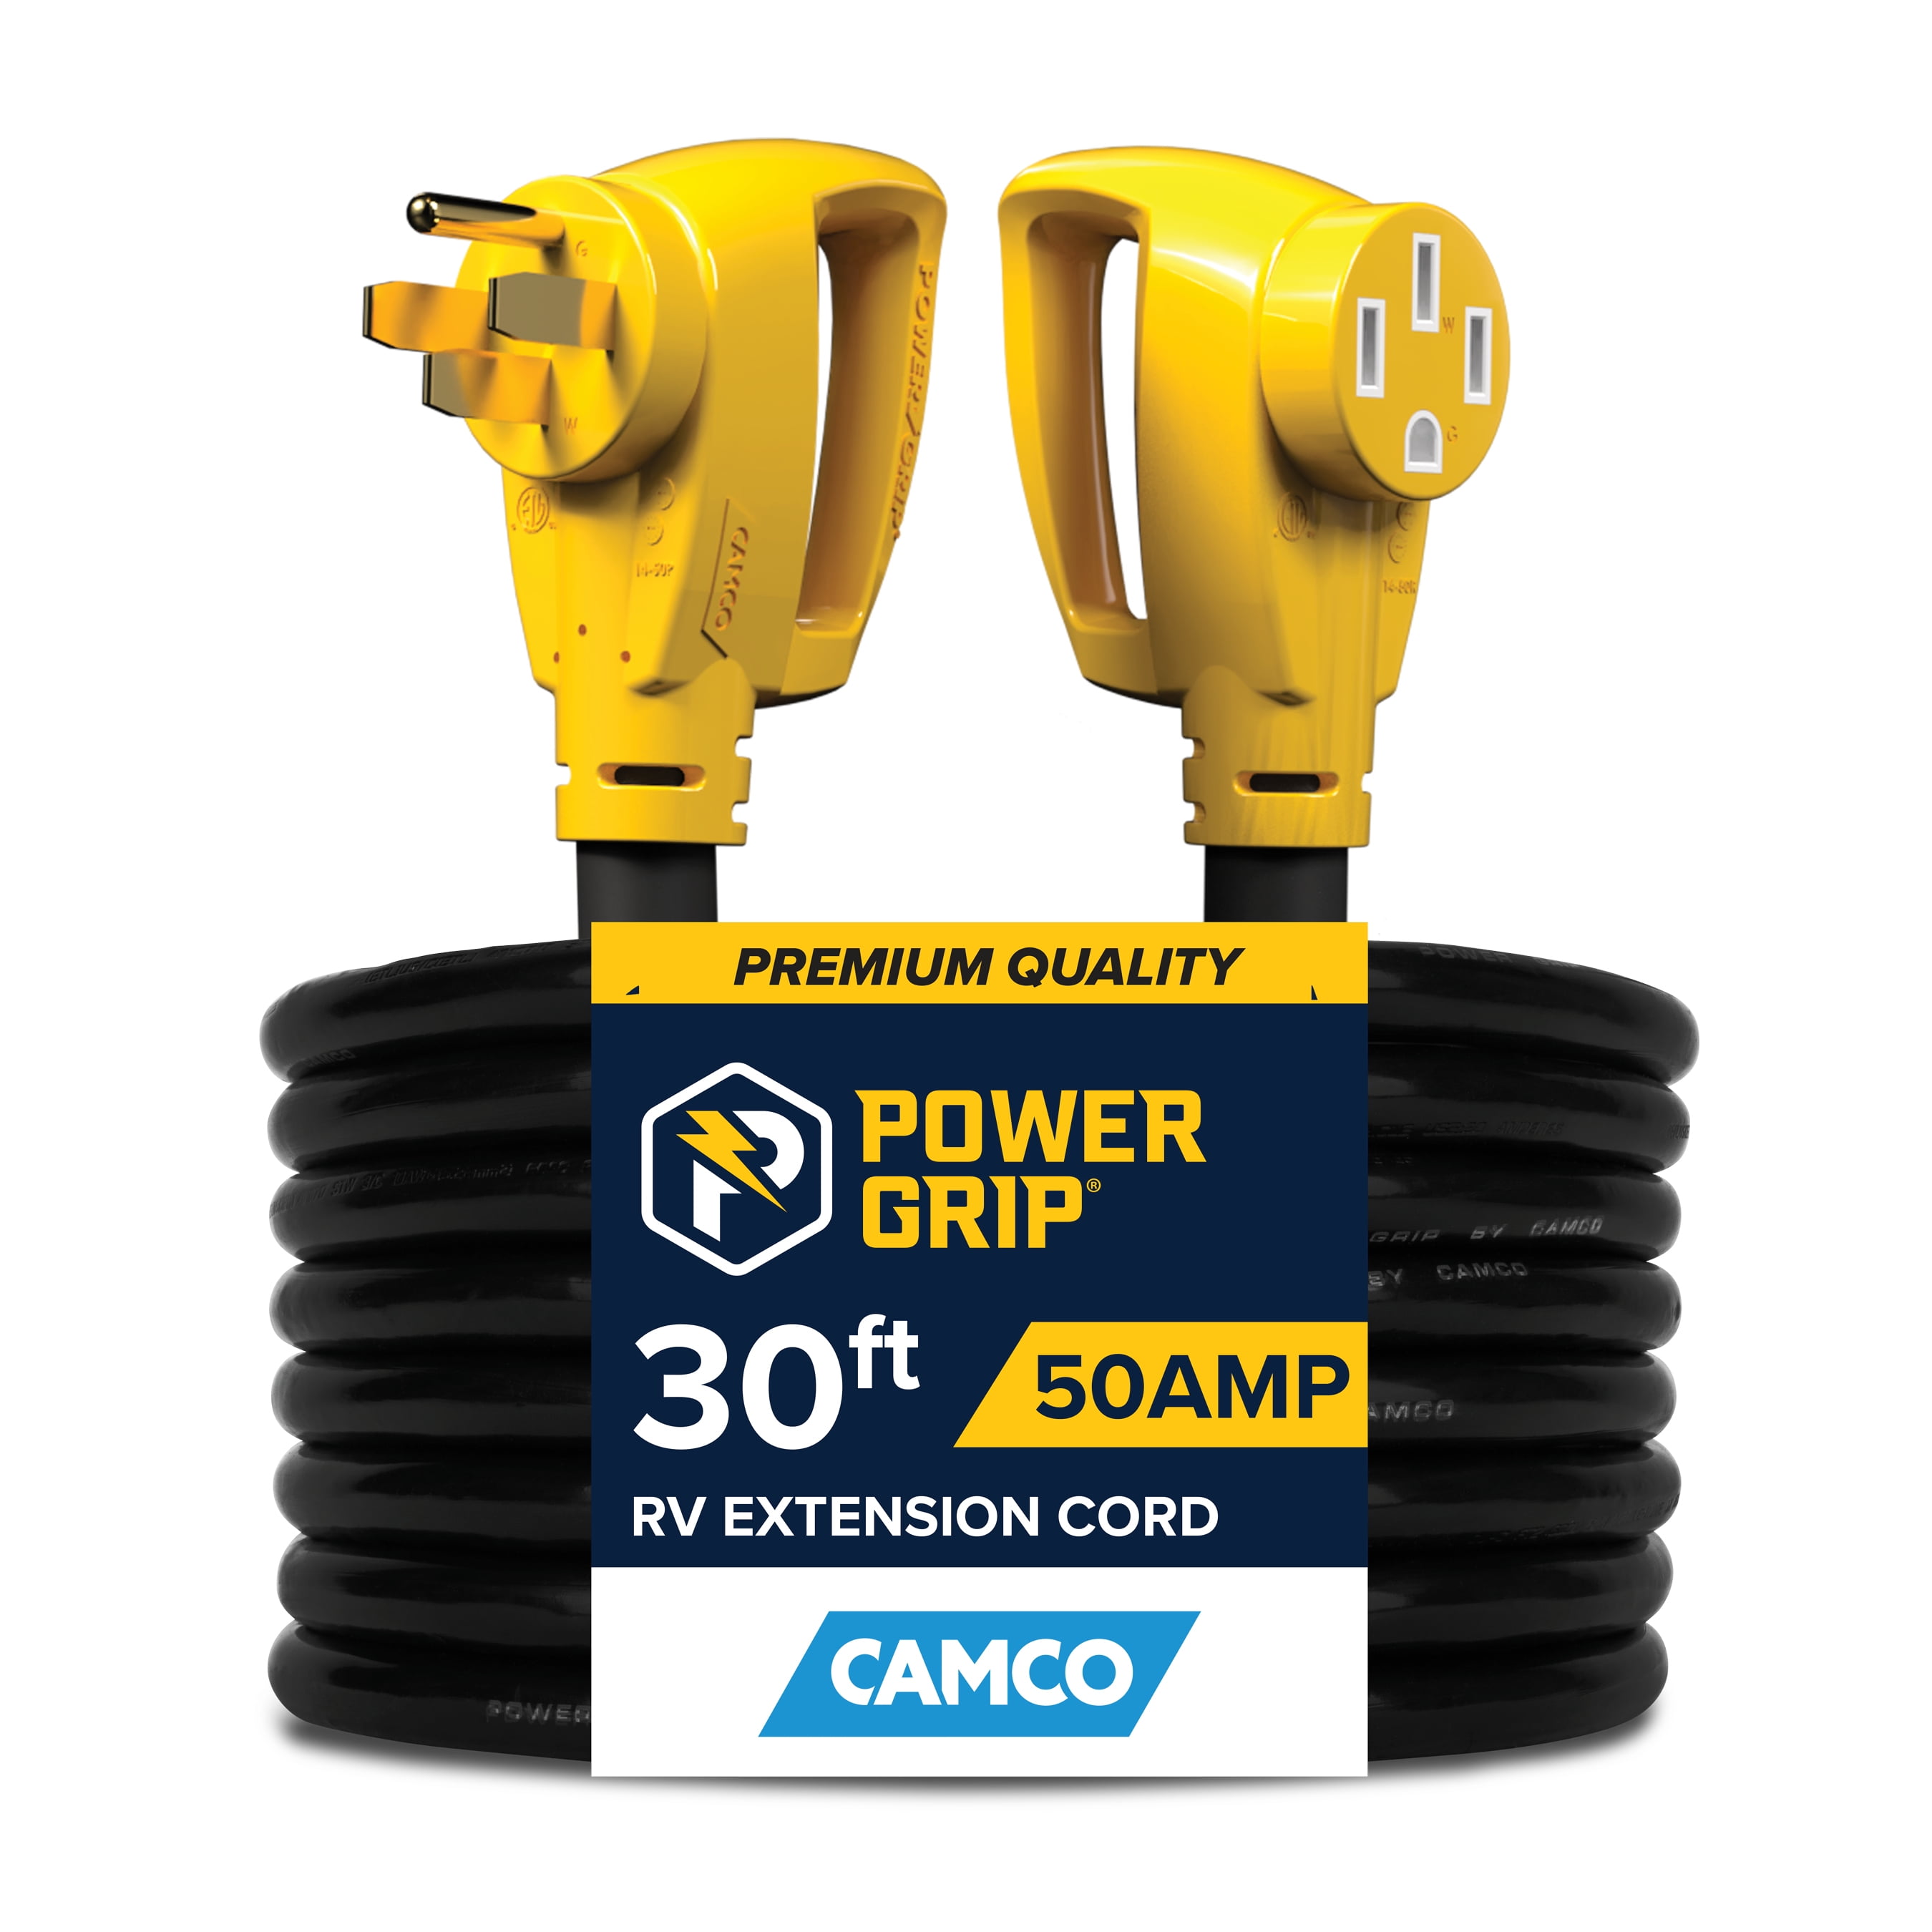 Camco PowerGrip Camper/RV 15-Foot Extension Cord  50-Amp, Rated for  125/250 Volts/12500 Watts (55194) 